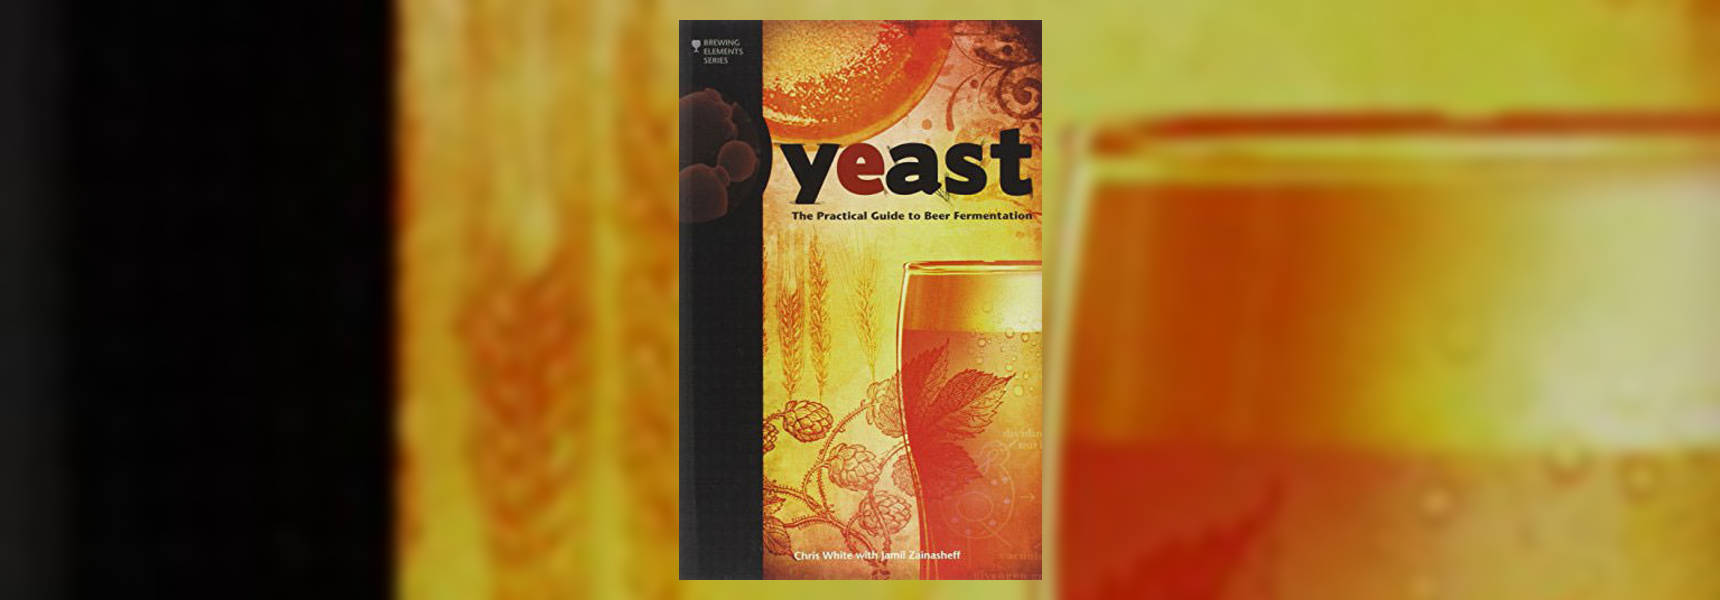 Yeast book cover